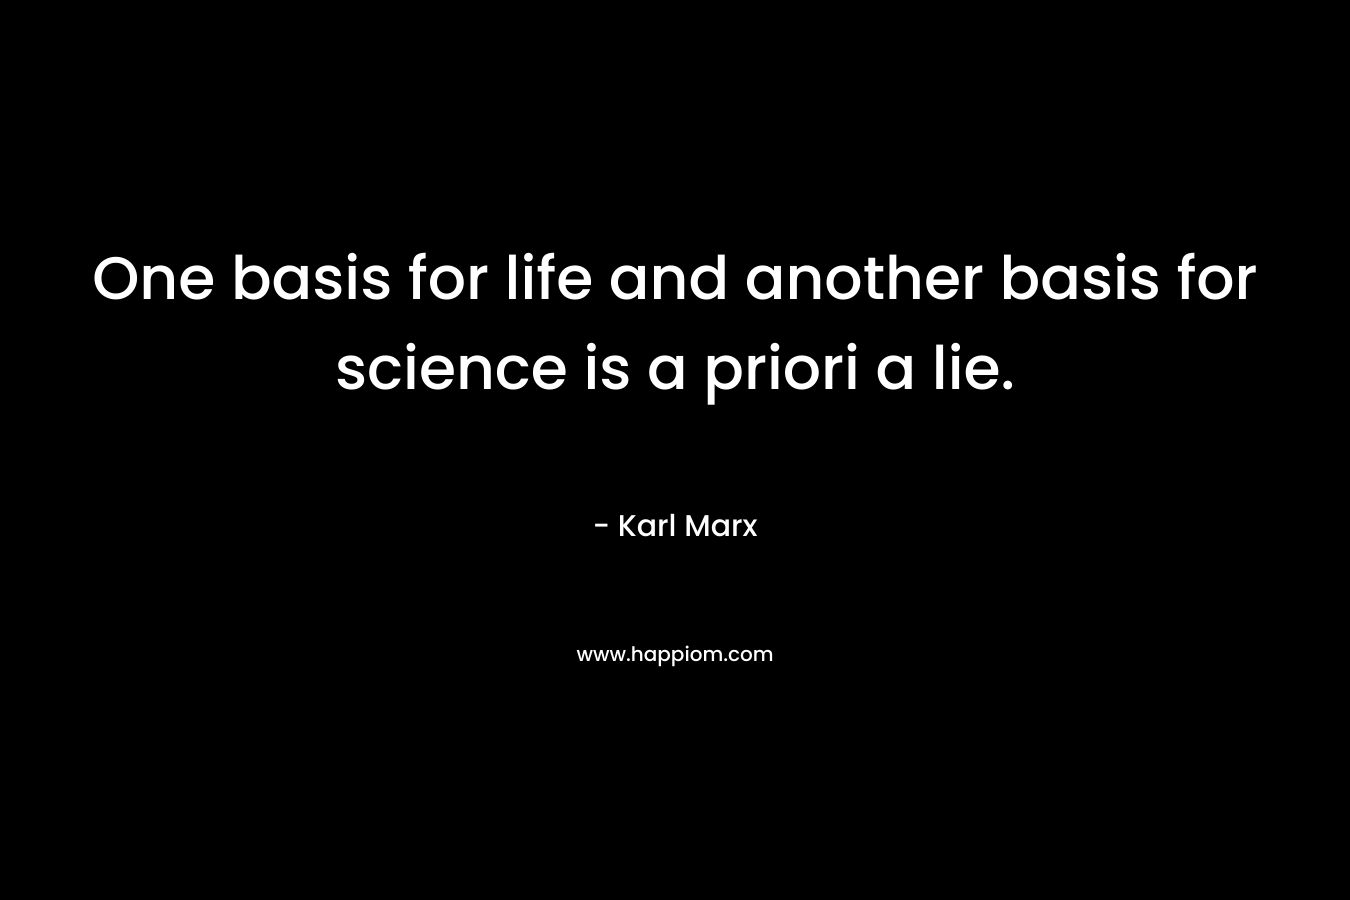 One basis for life and another basis for science is a priori a lie.